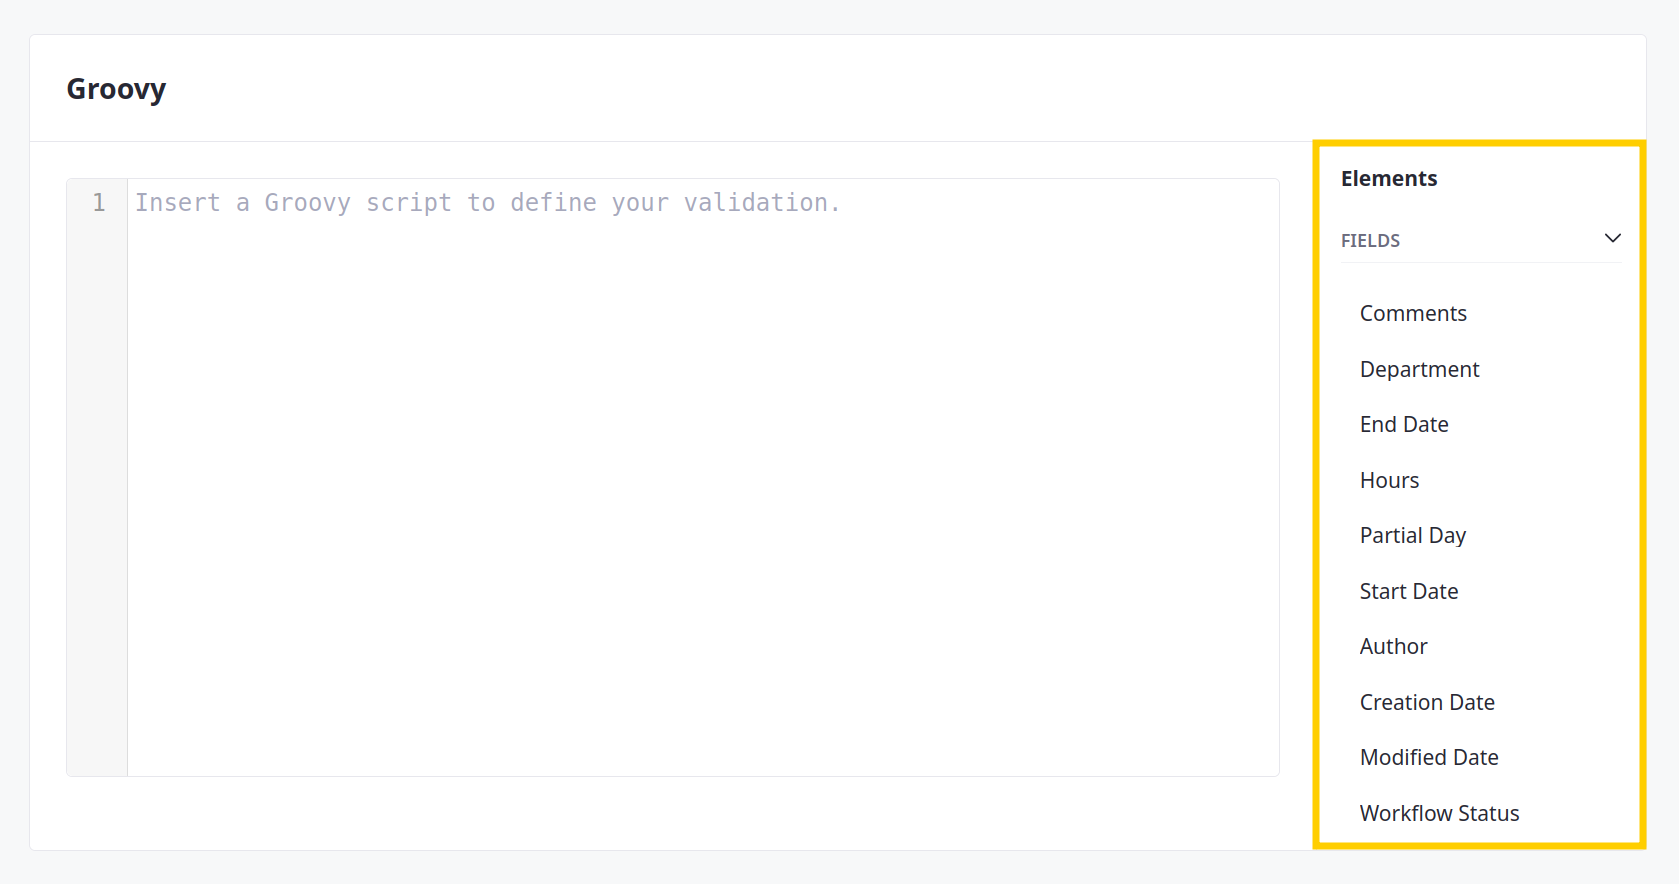 Use the side panel to add field elements to your Groovy validations.